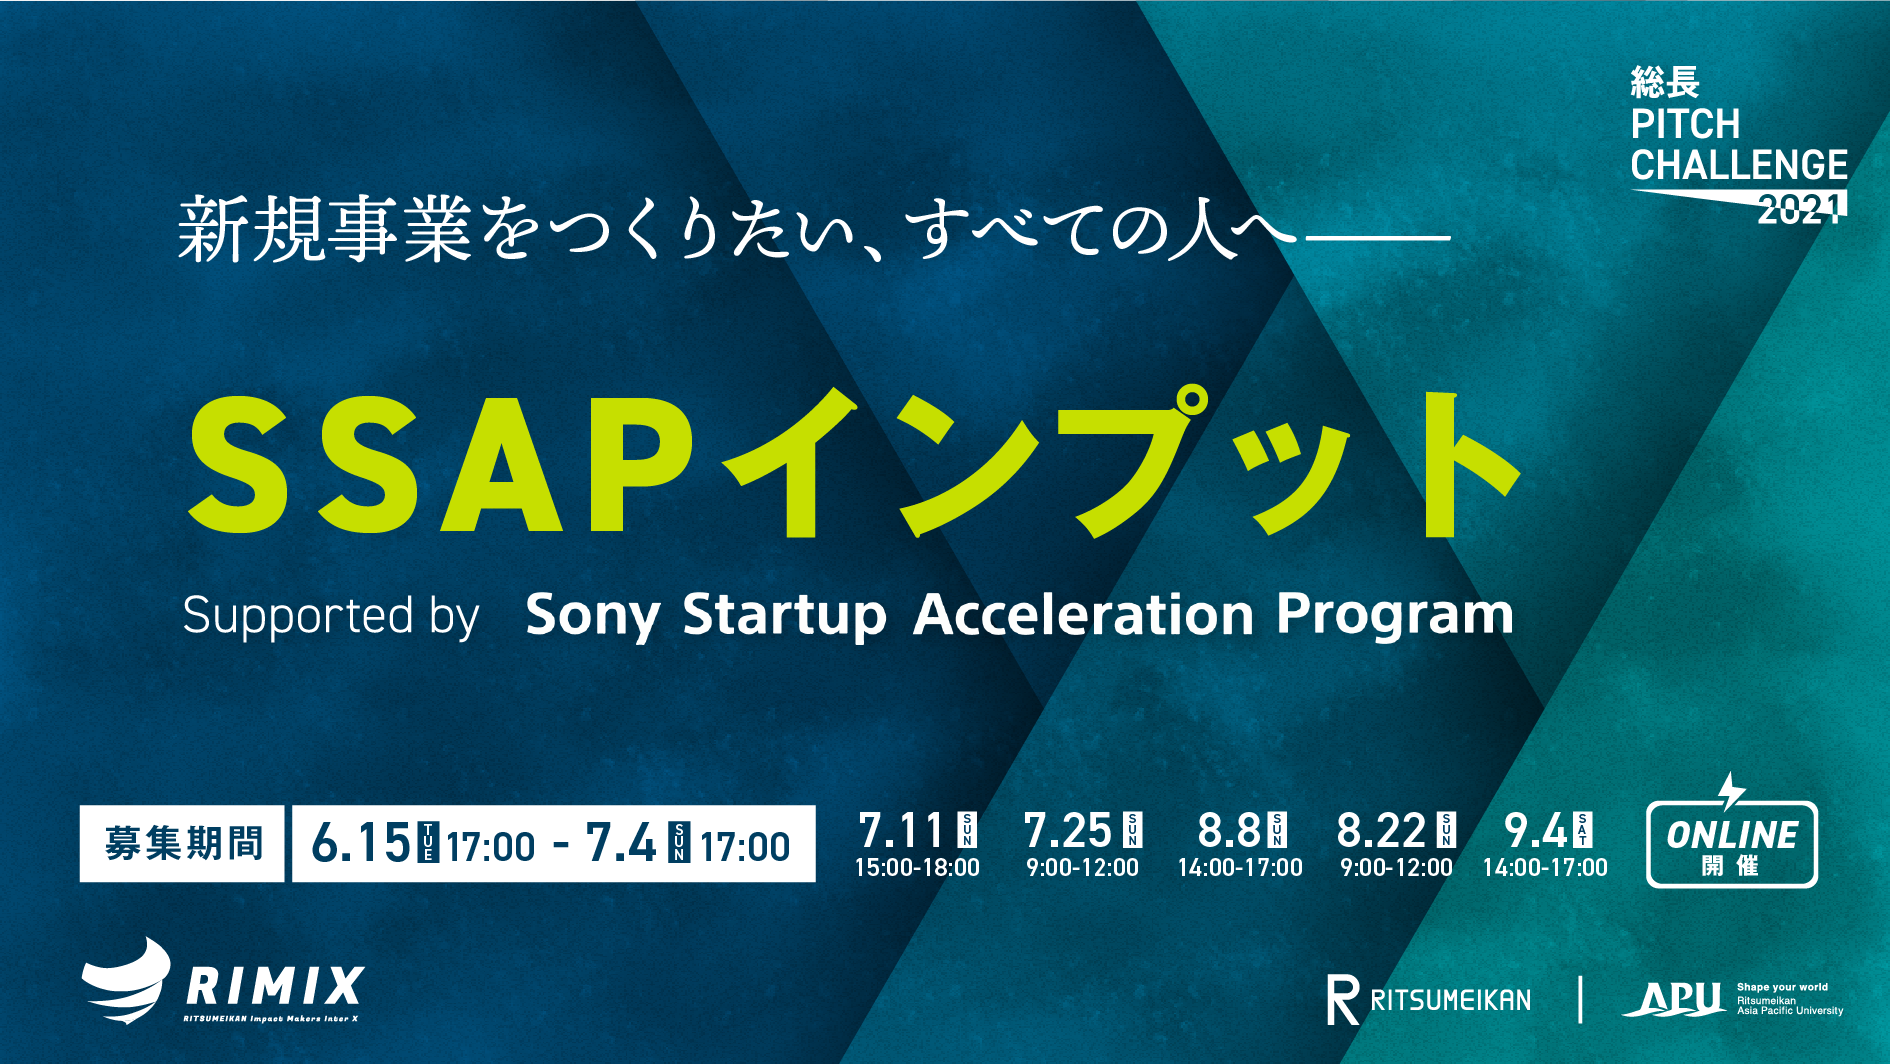 「SSAPインプット」Supported by Sony Startup Acceleration Program を開催します！